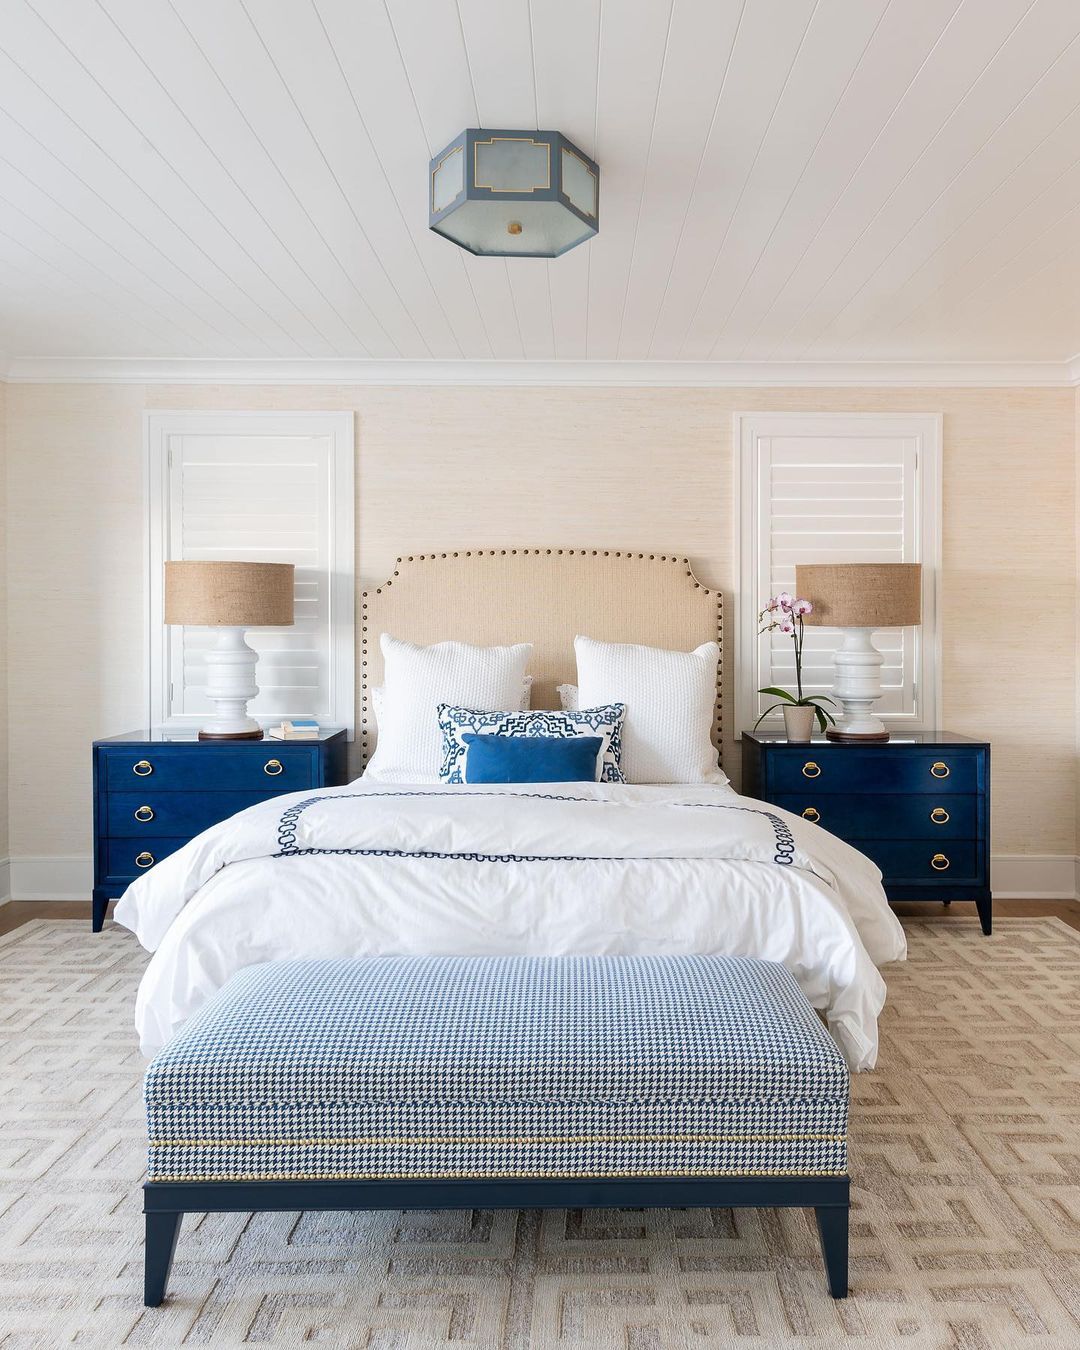 Integrate Bold Blues with Neutral Tones